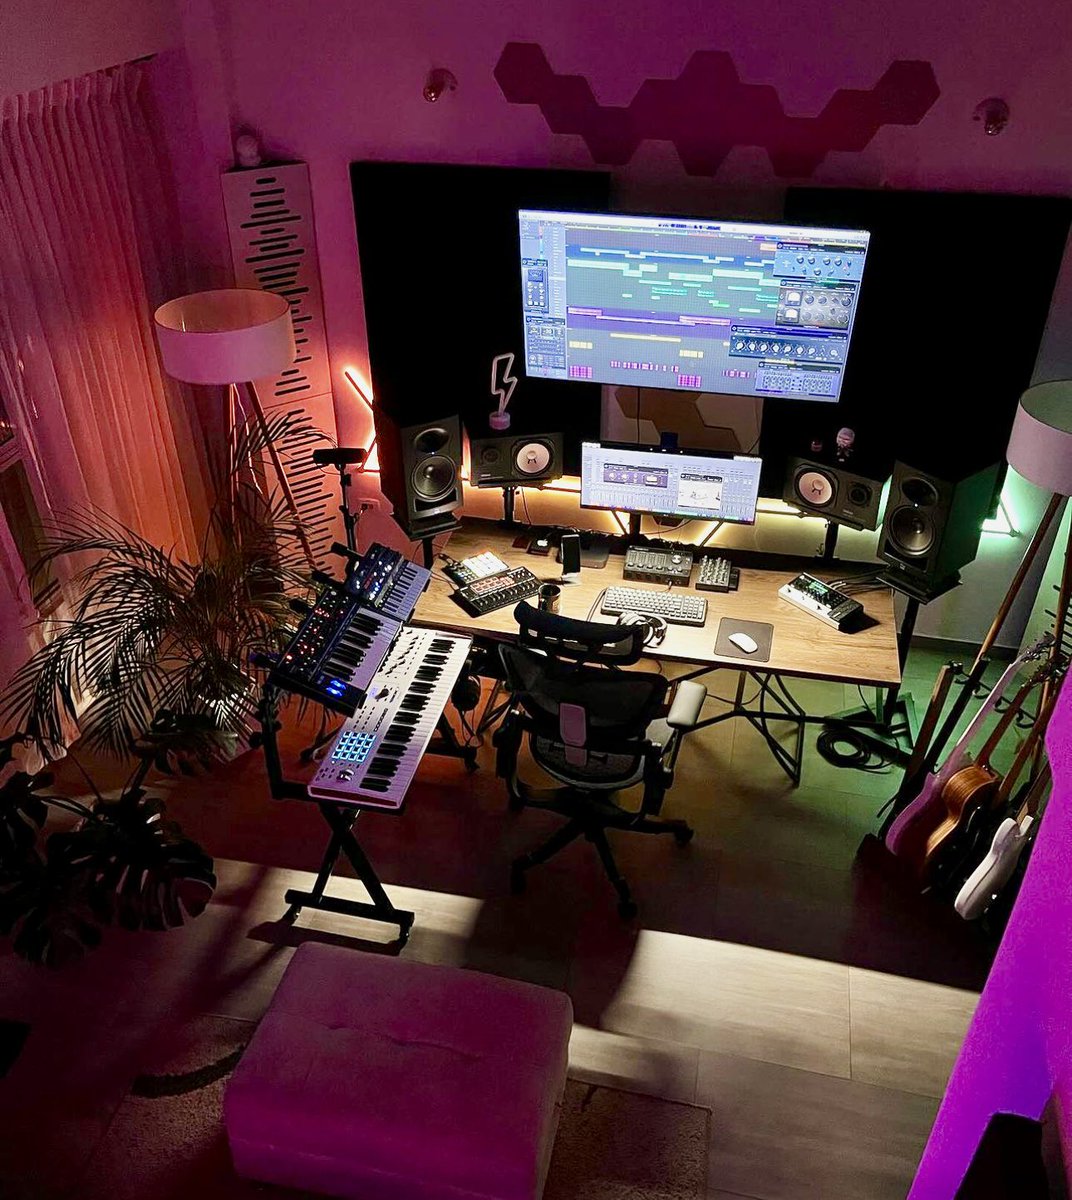 How many hours would you need here? #StudioLife